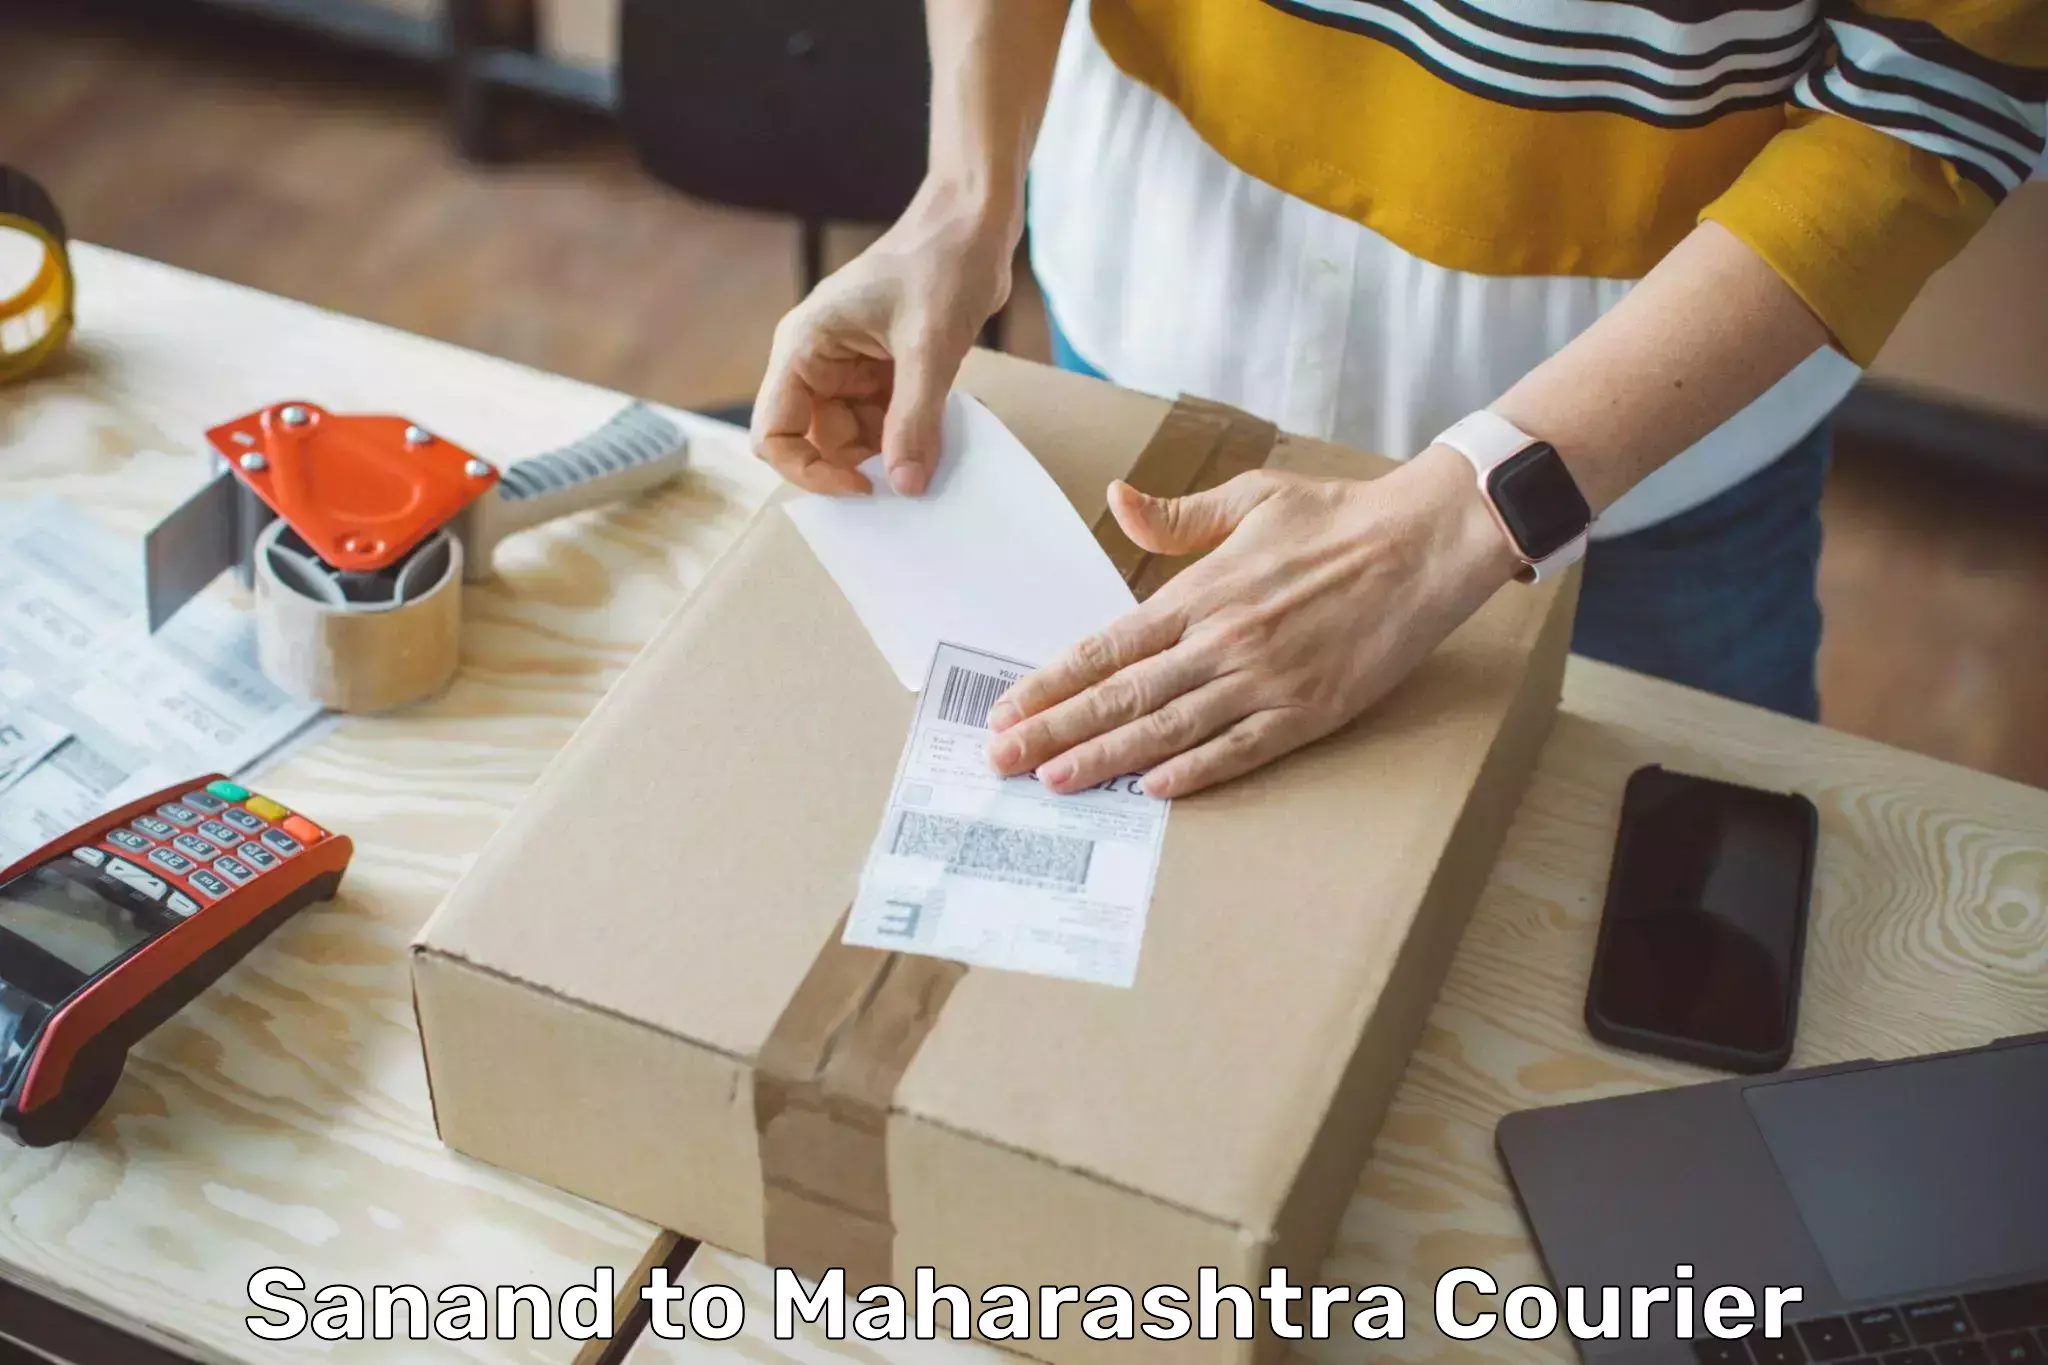 Same-day delivery solutions Sanand to Maharashtra